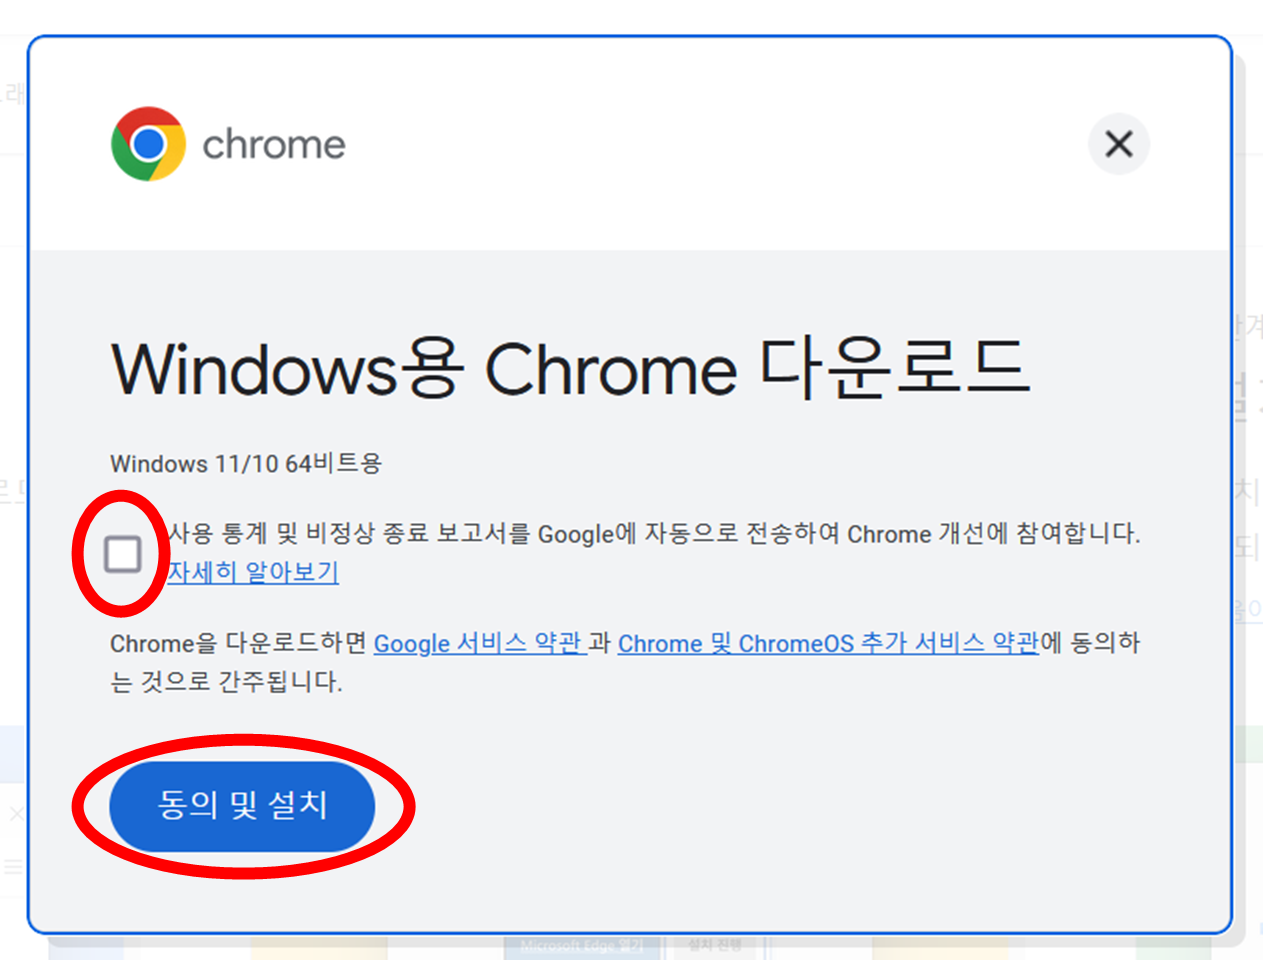 2. How to Download Chrome PC ver. 